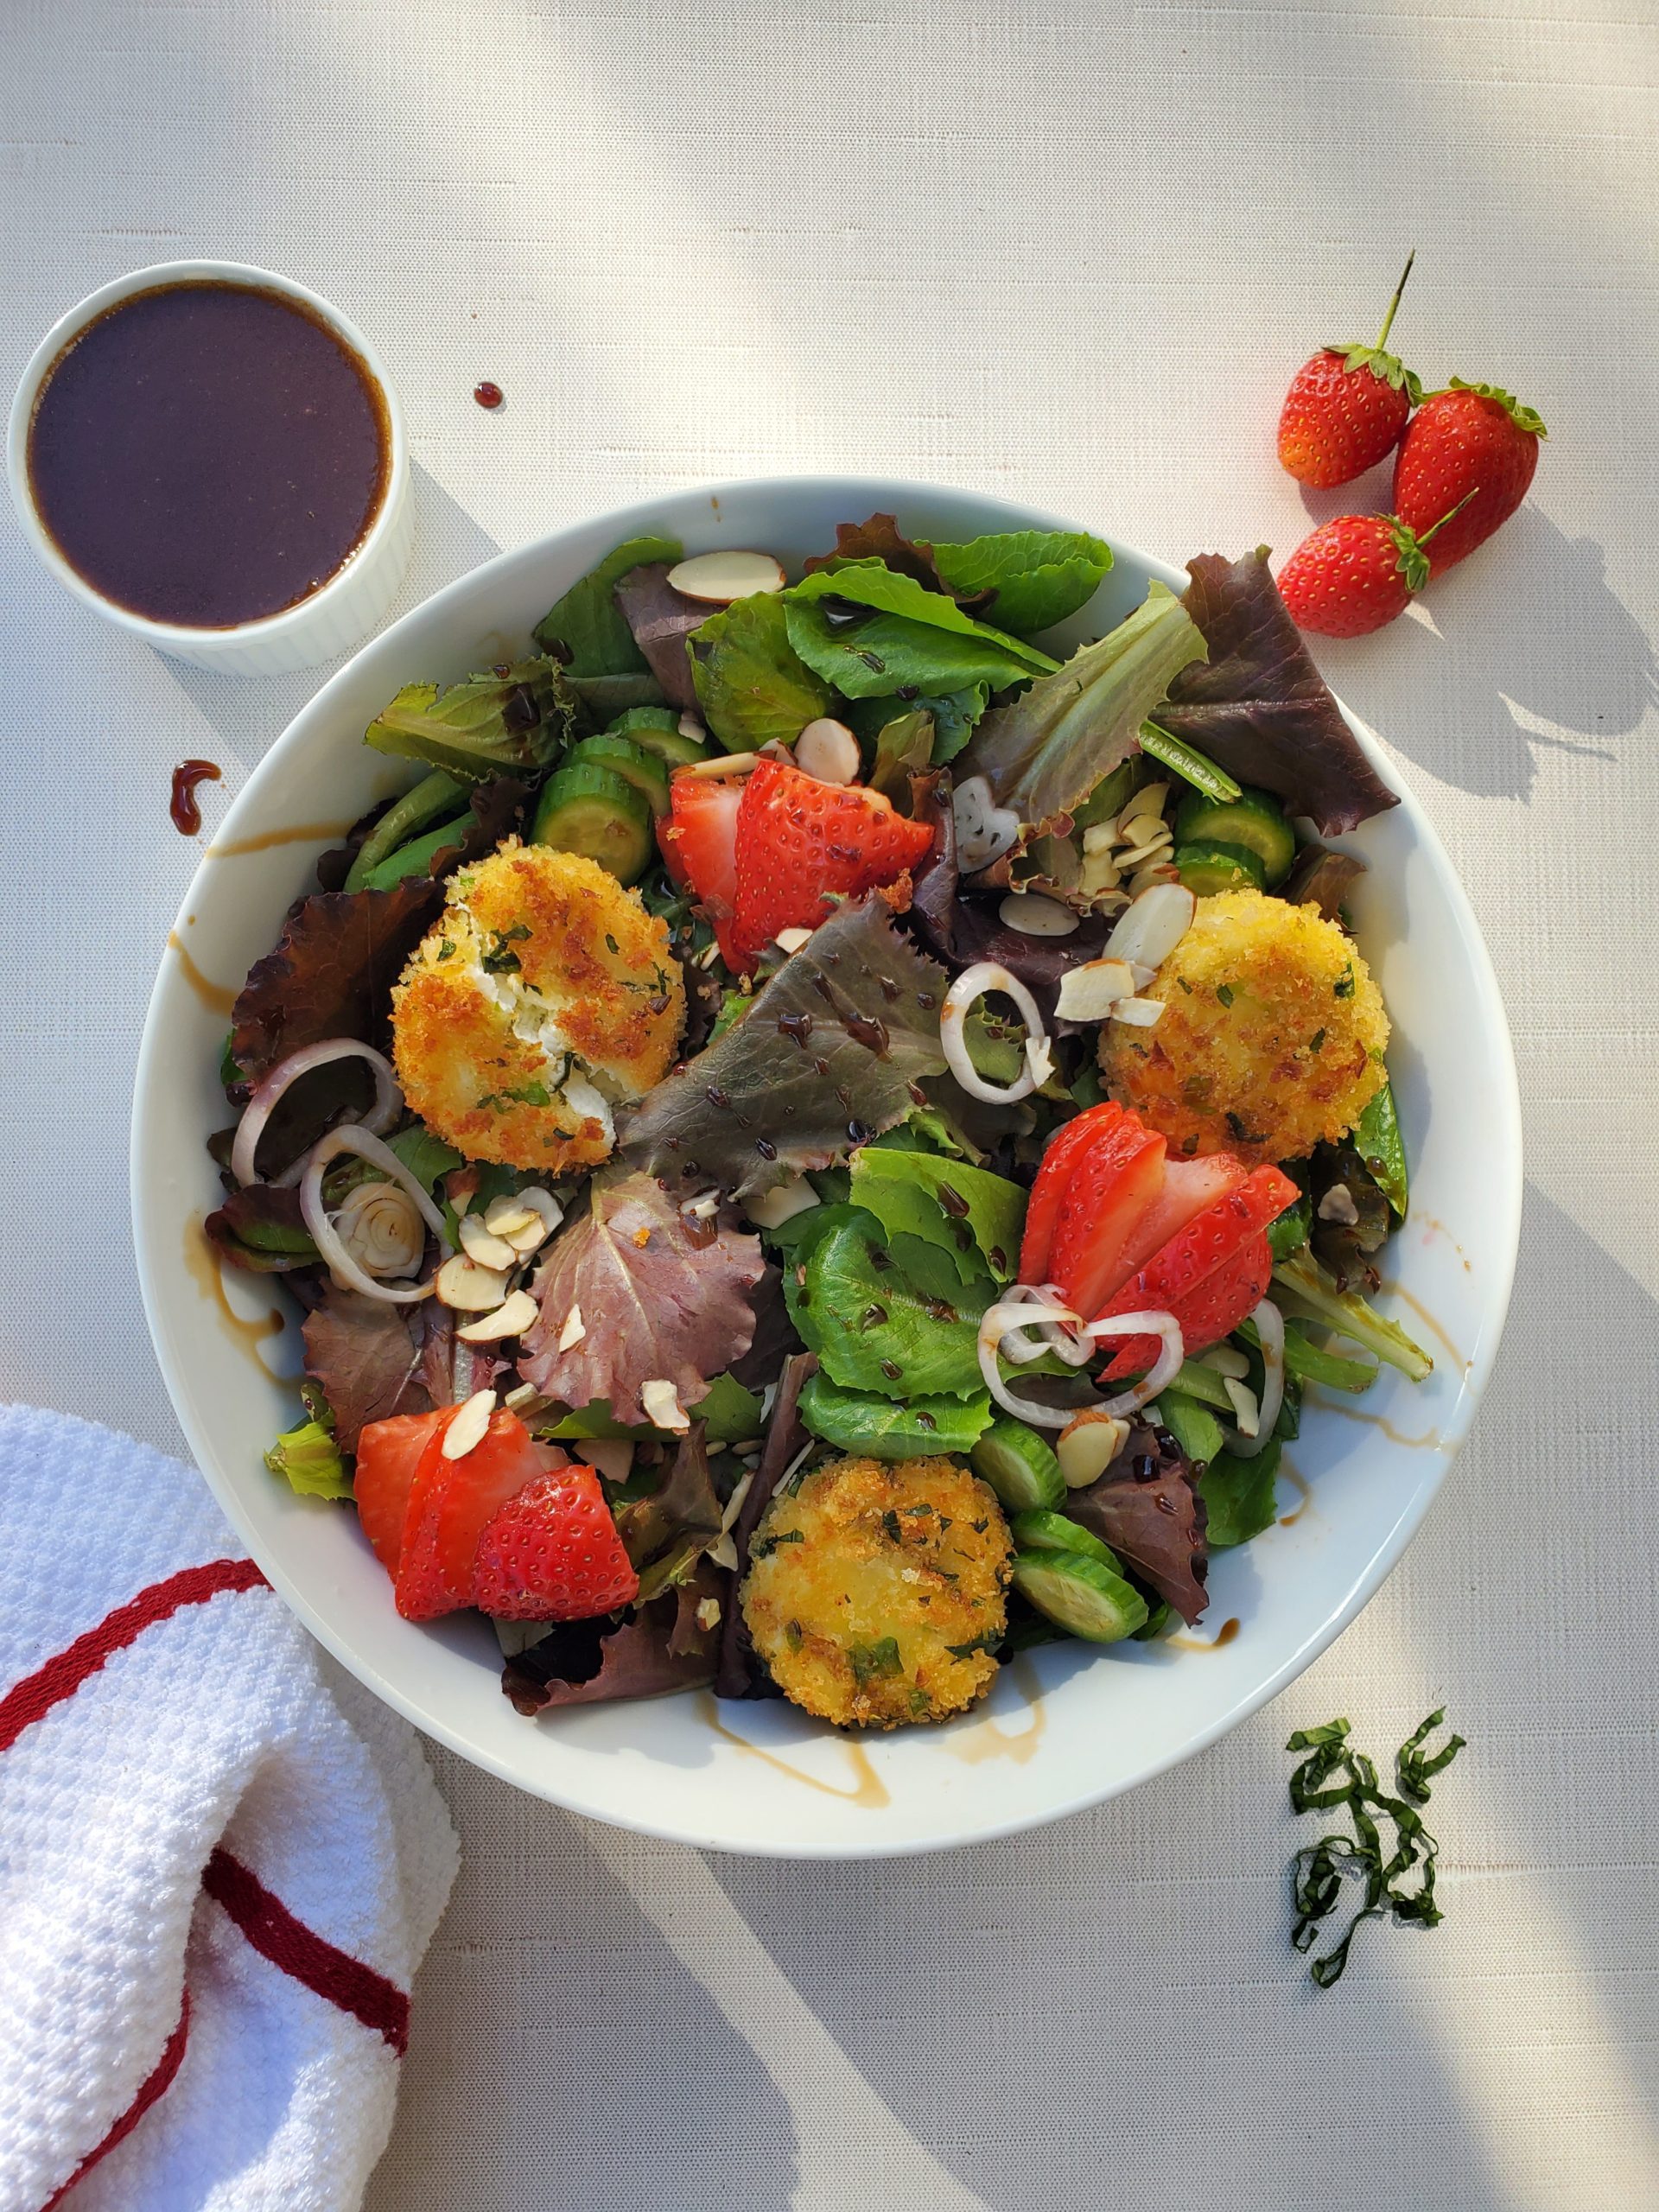 Fried Goat Cheese and Strawberry Salad in a bowl